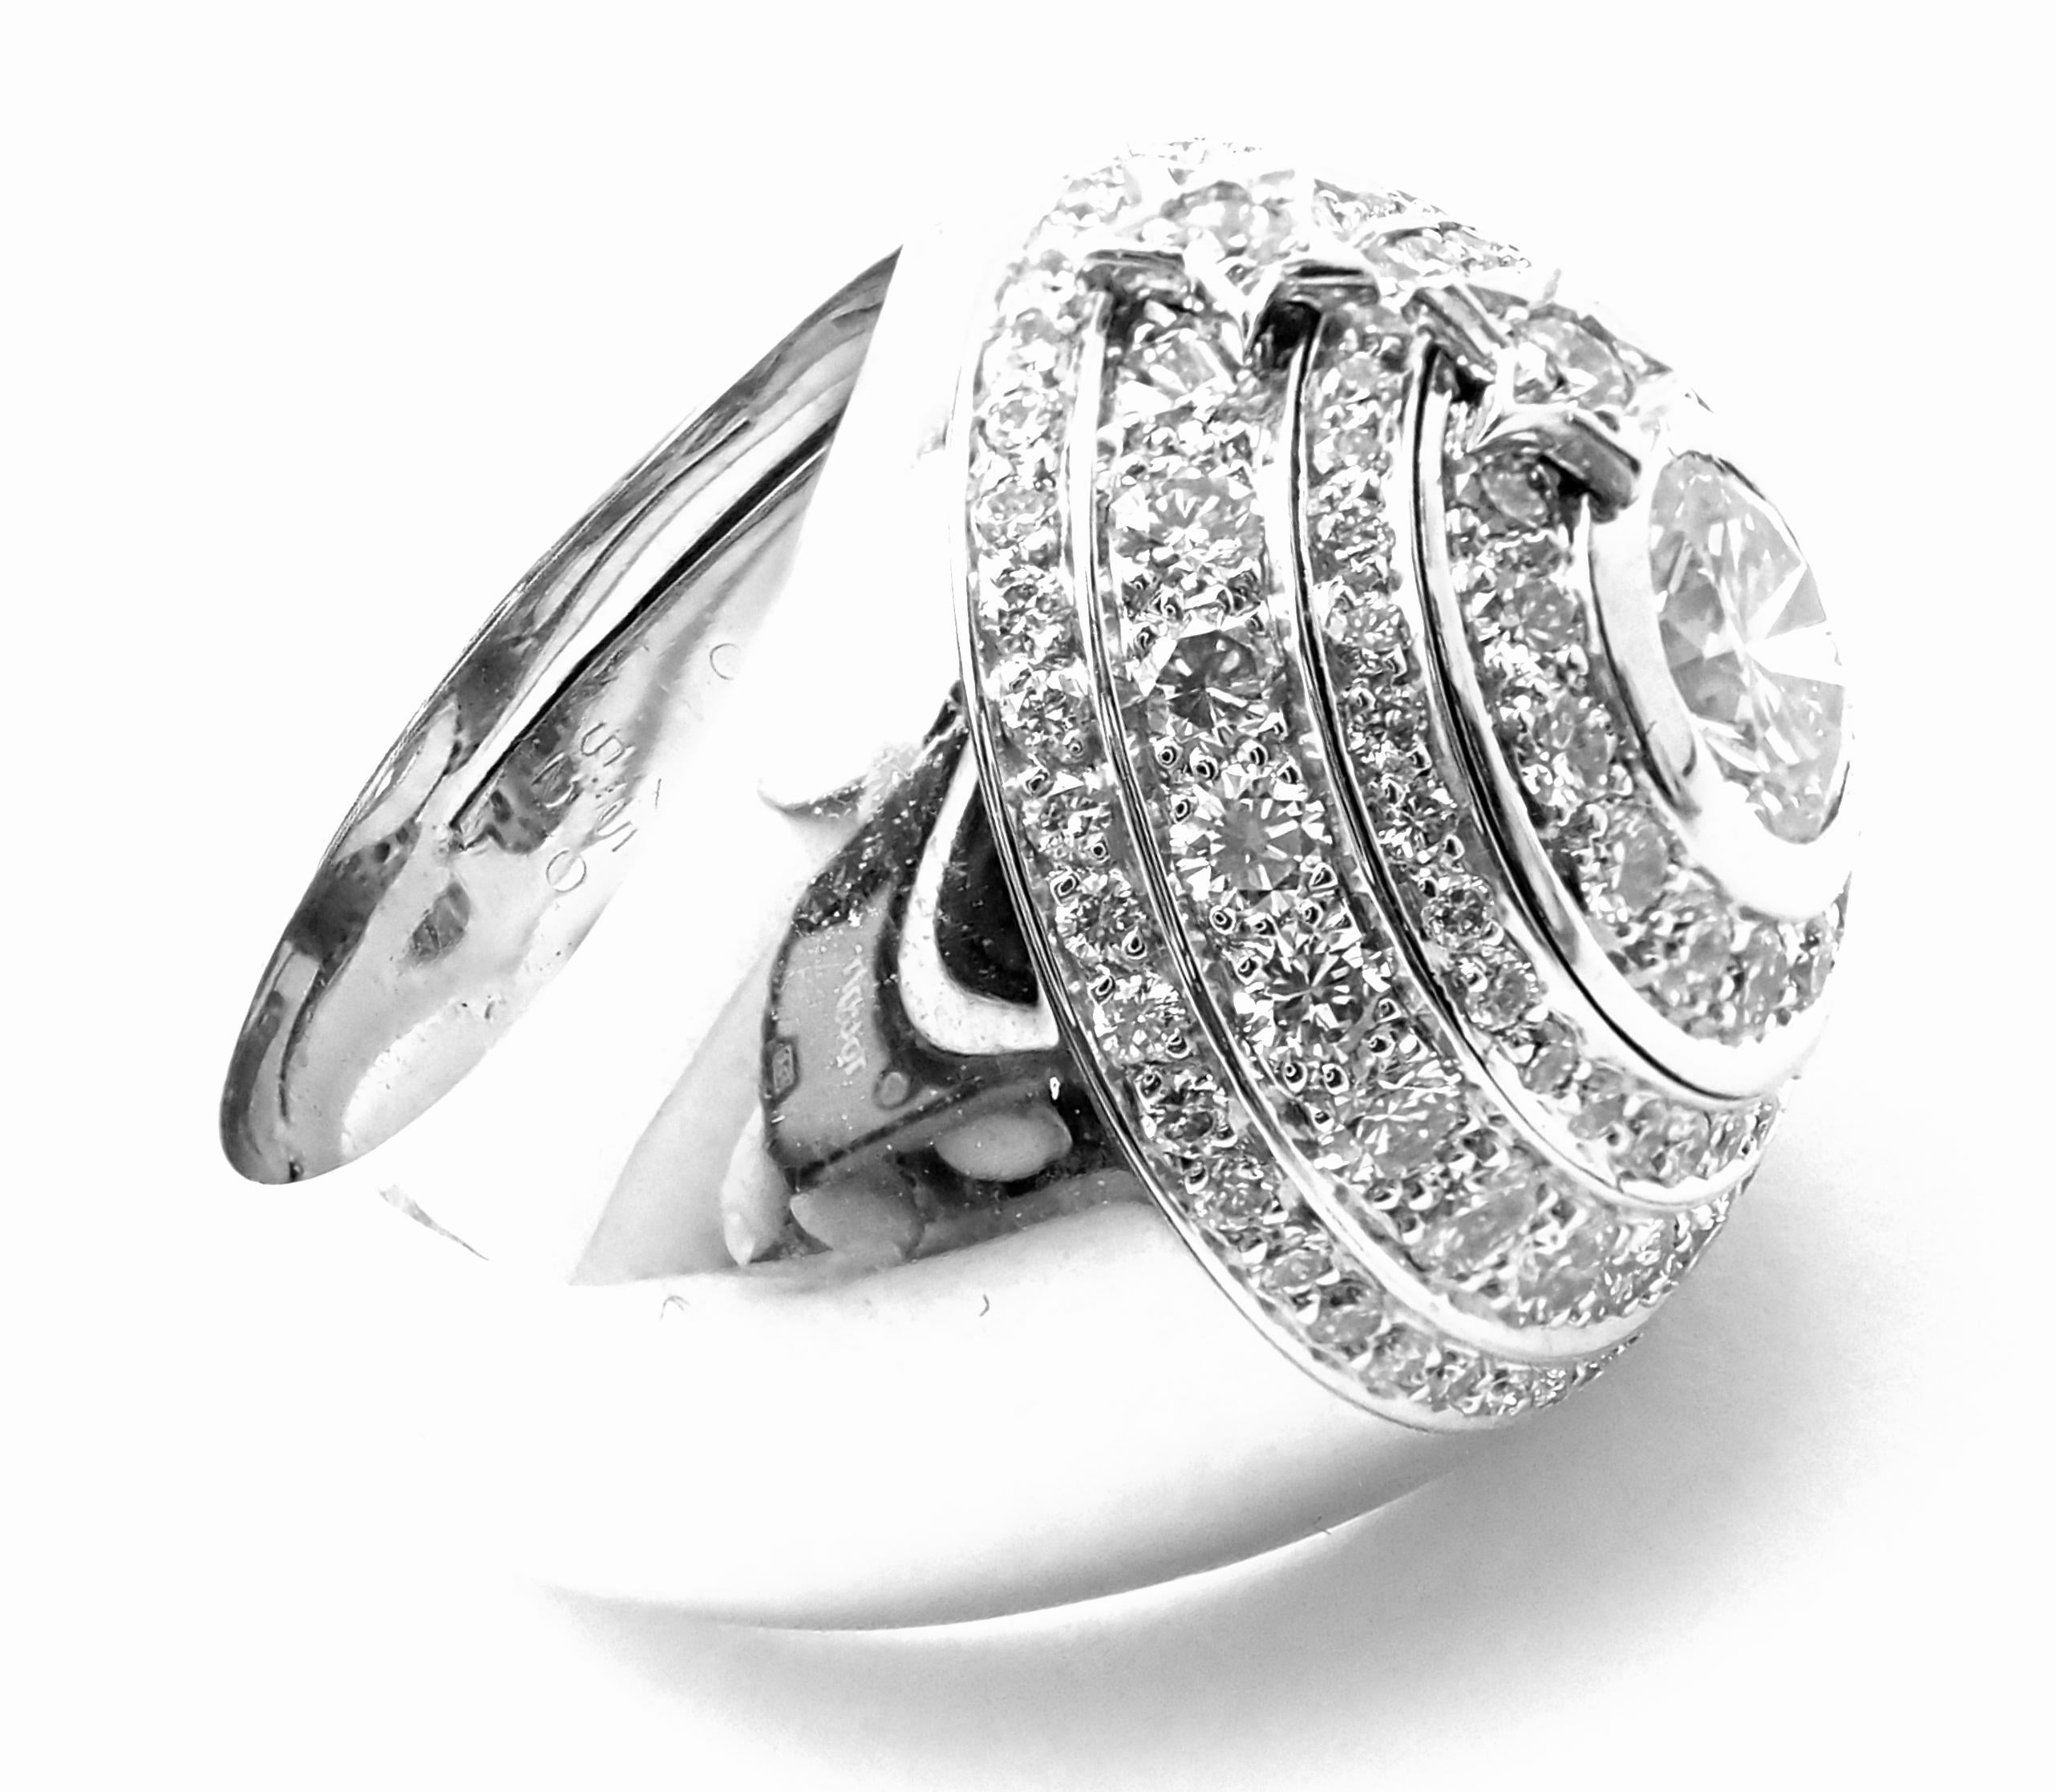 18k White Gold Comete Star Diamond Large Spinning Ring by Chanel.
With Center 1 round brilliant cut diamond E color, VVS1 clarity total weight approximately .77ct
118 round brilliant cut diamonds E color, VVS1 clarity total weight approximately